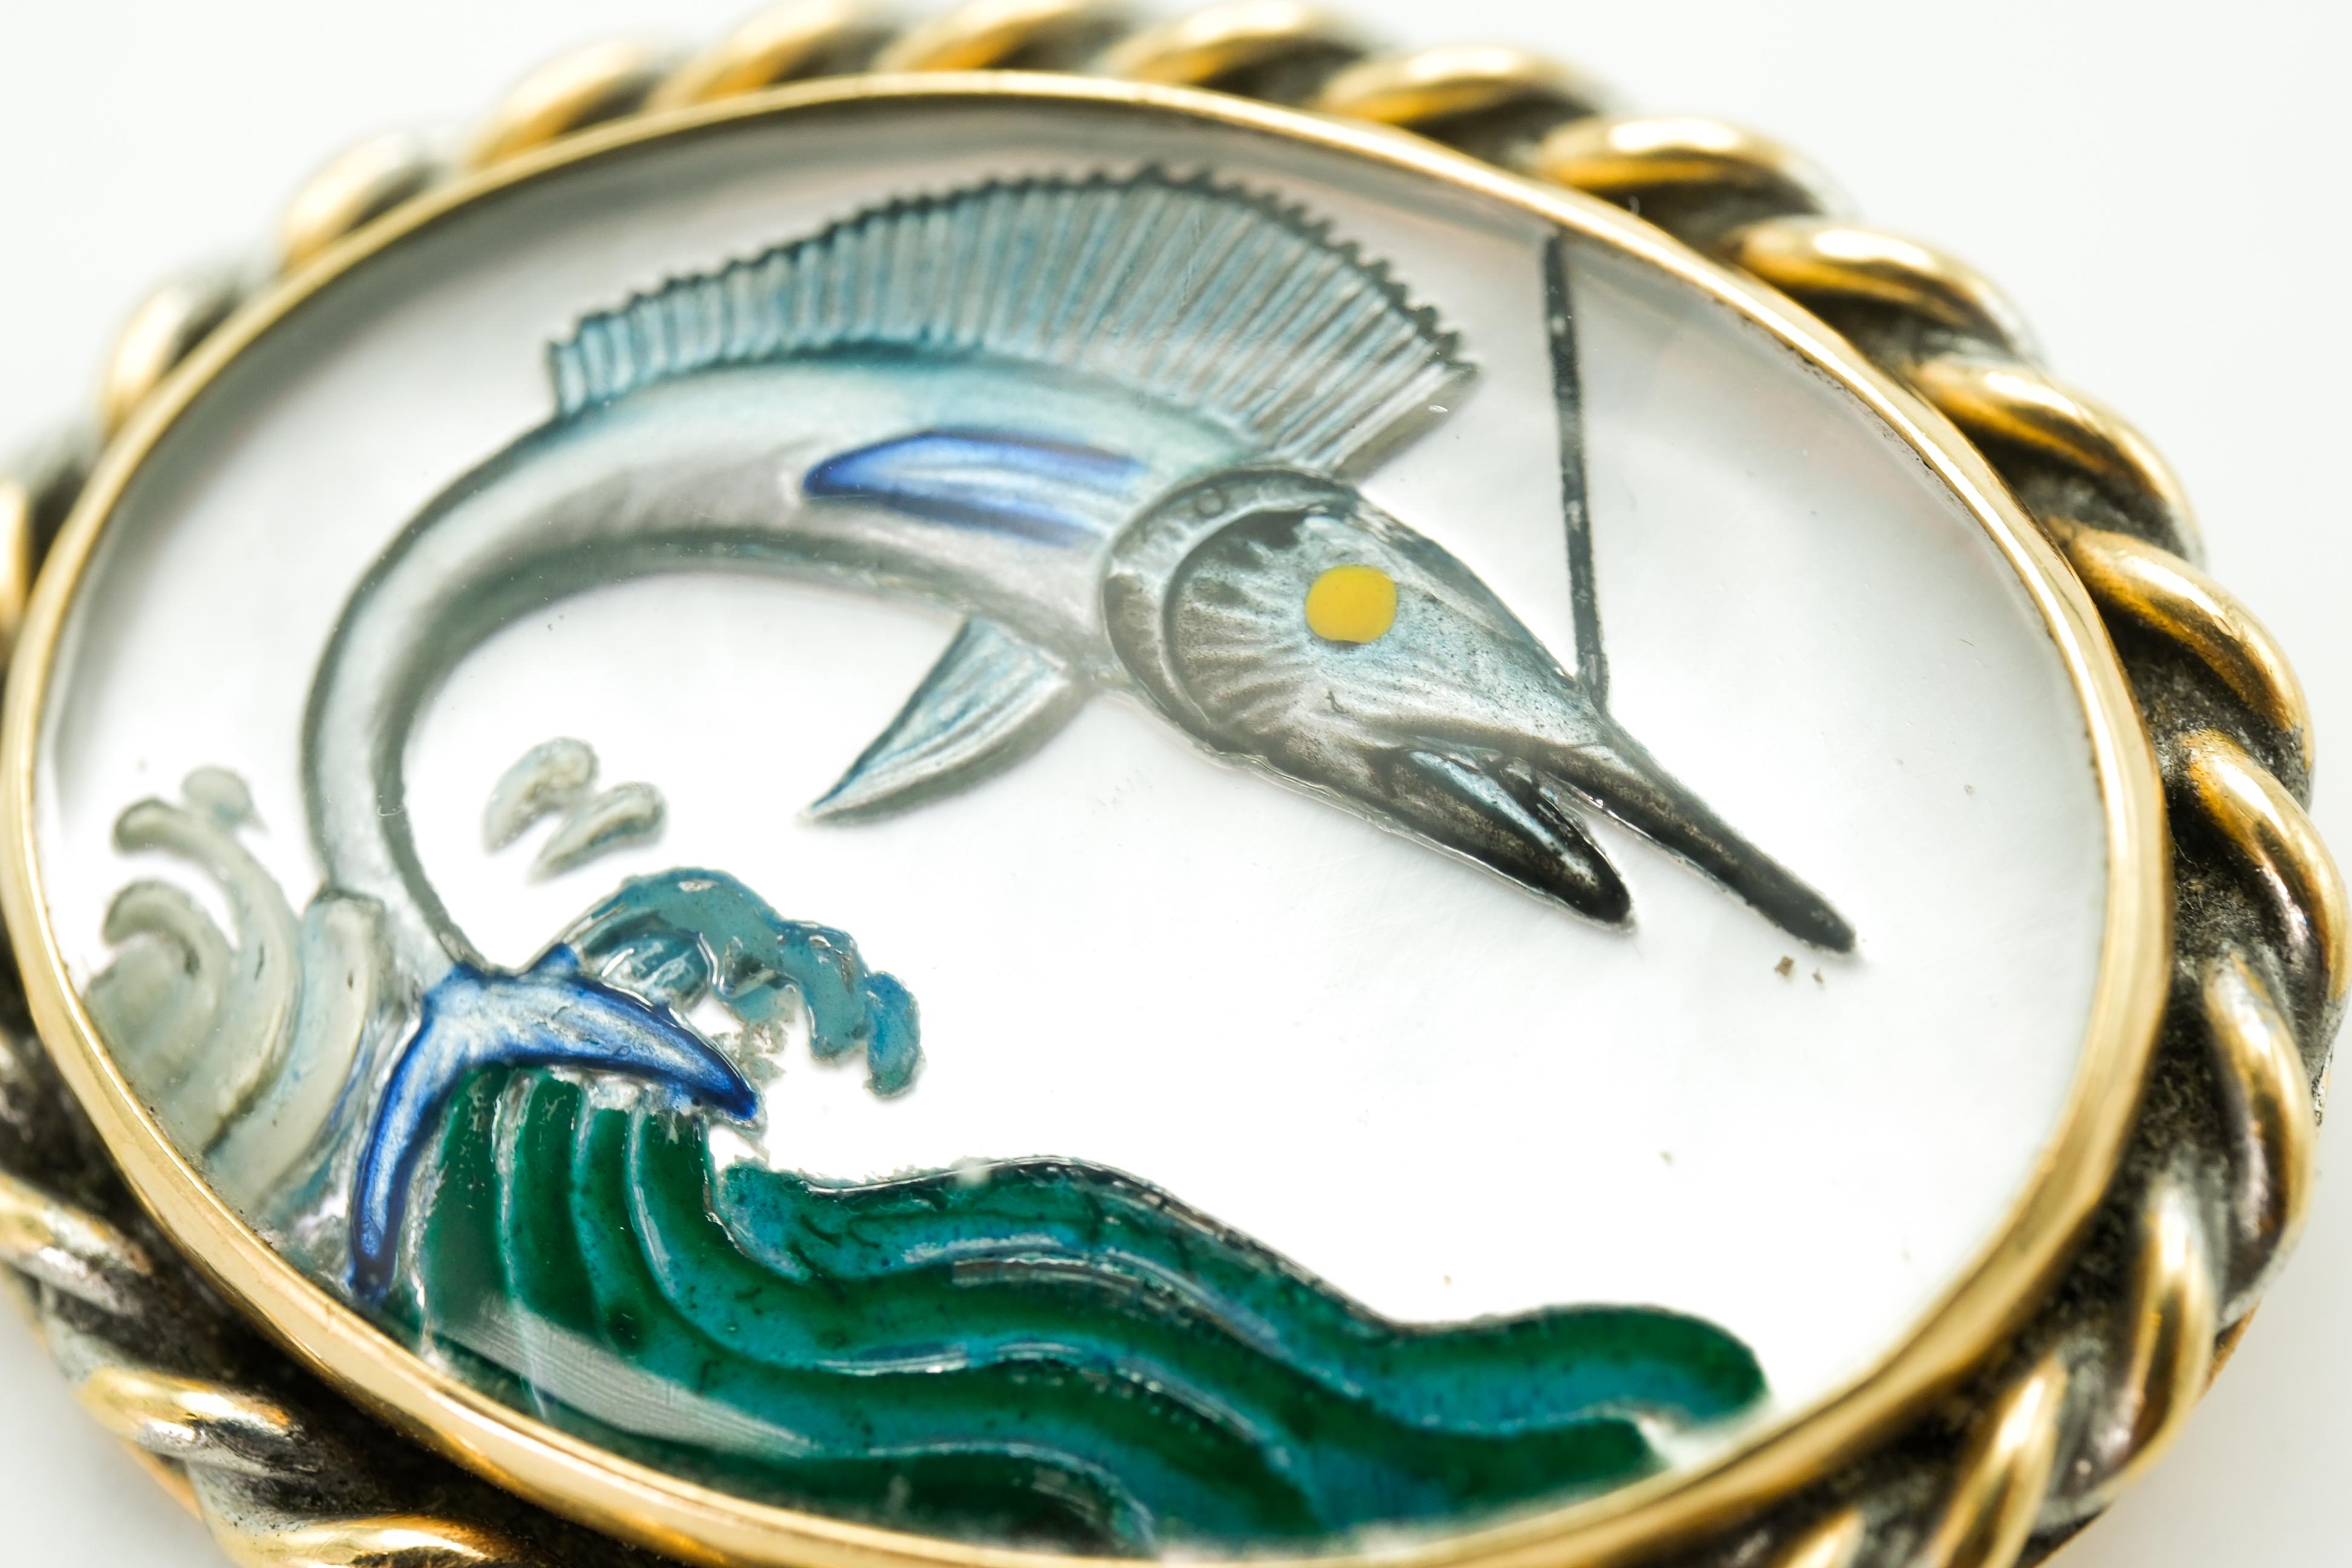 This vintage brooch is crafted from 14 karat yellow gold and features a reverse painting intaglio of a marlin. The depicted scene showcases an active marlin leaping dynamically from the ocean, captured intricately within the crystal. Framing the